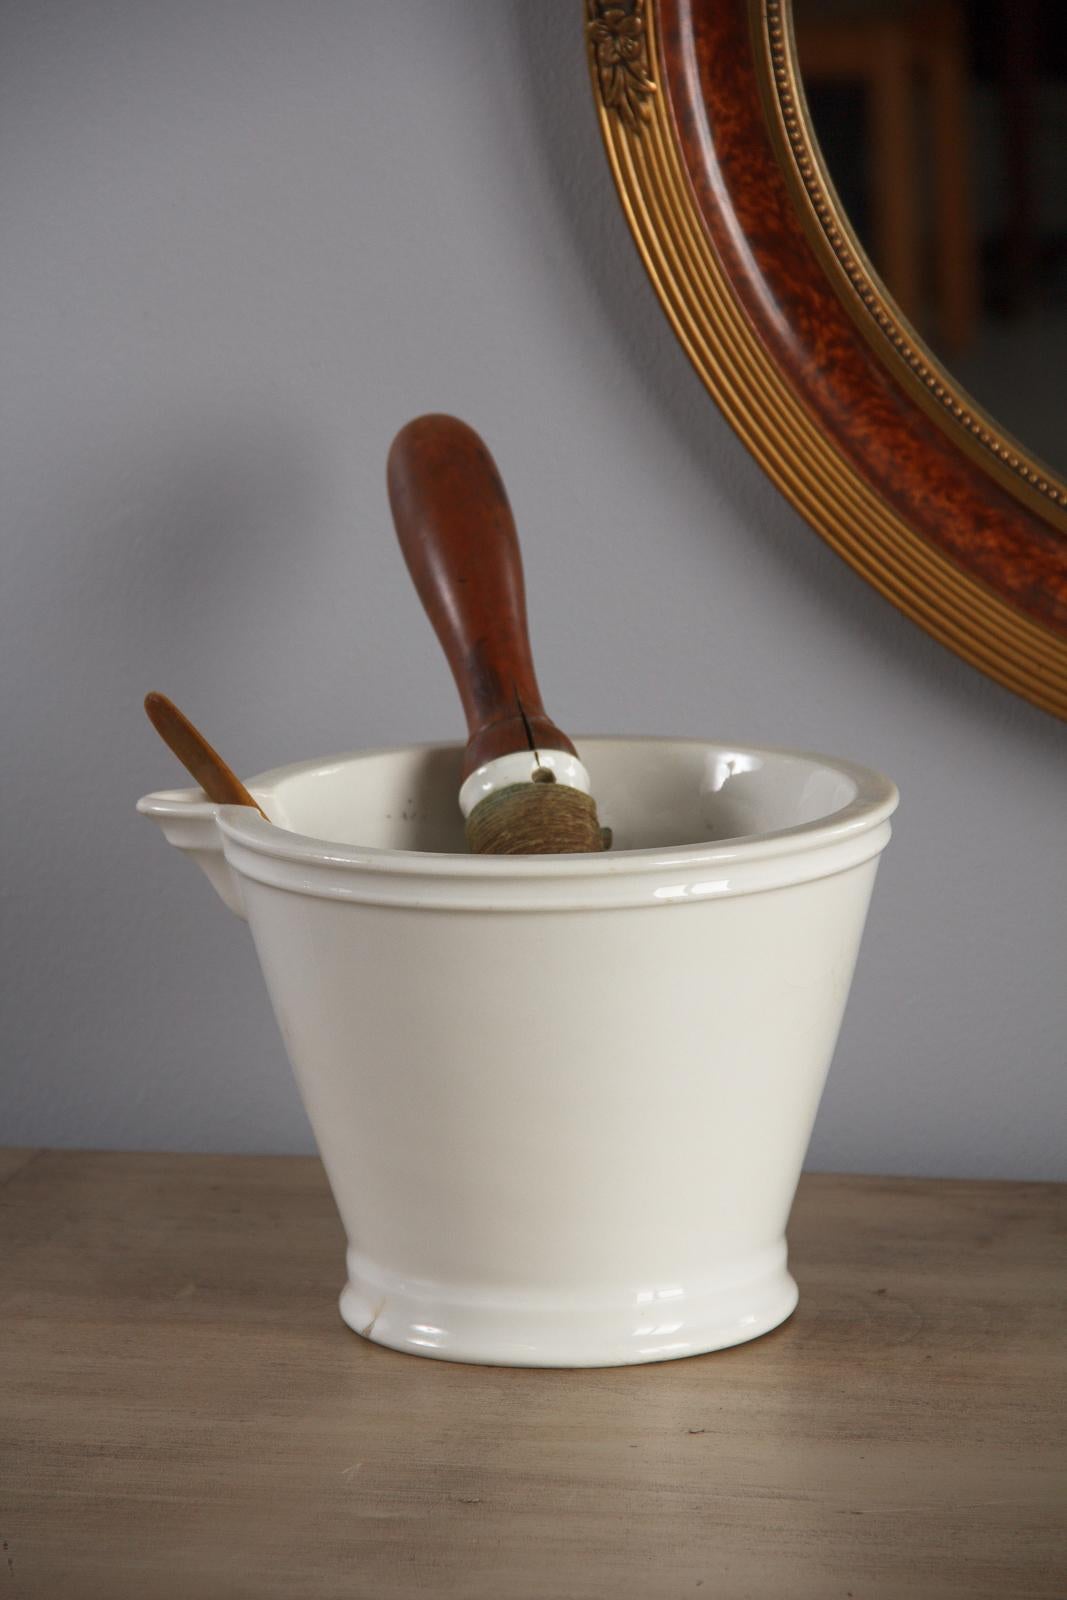 A large, glazed ceramic pharmacist's mortar and pestle for apothecary use, circa late 1800s. White ceramic form with a flared top and tapered base, molding at the foot and at the rim. The pour spot is angled and level with the rim. Smoothly glazed